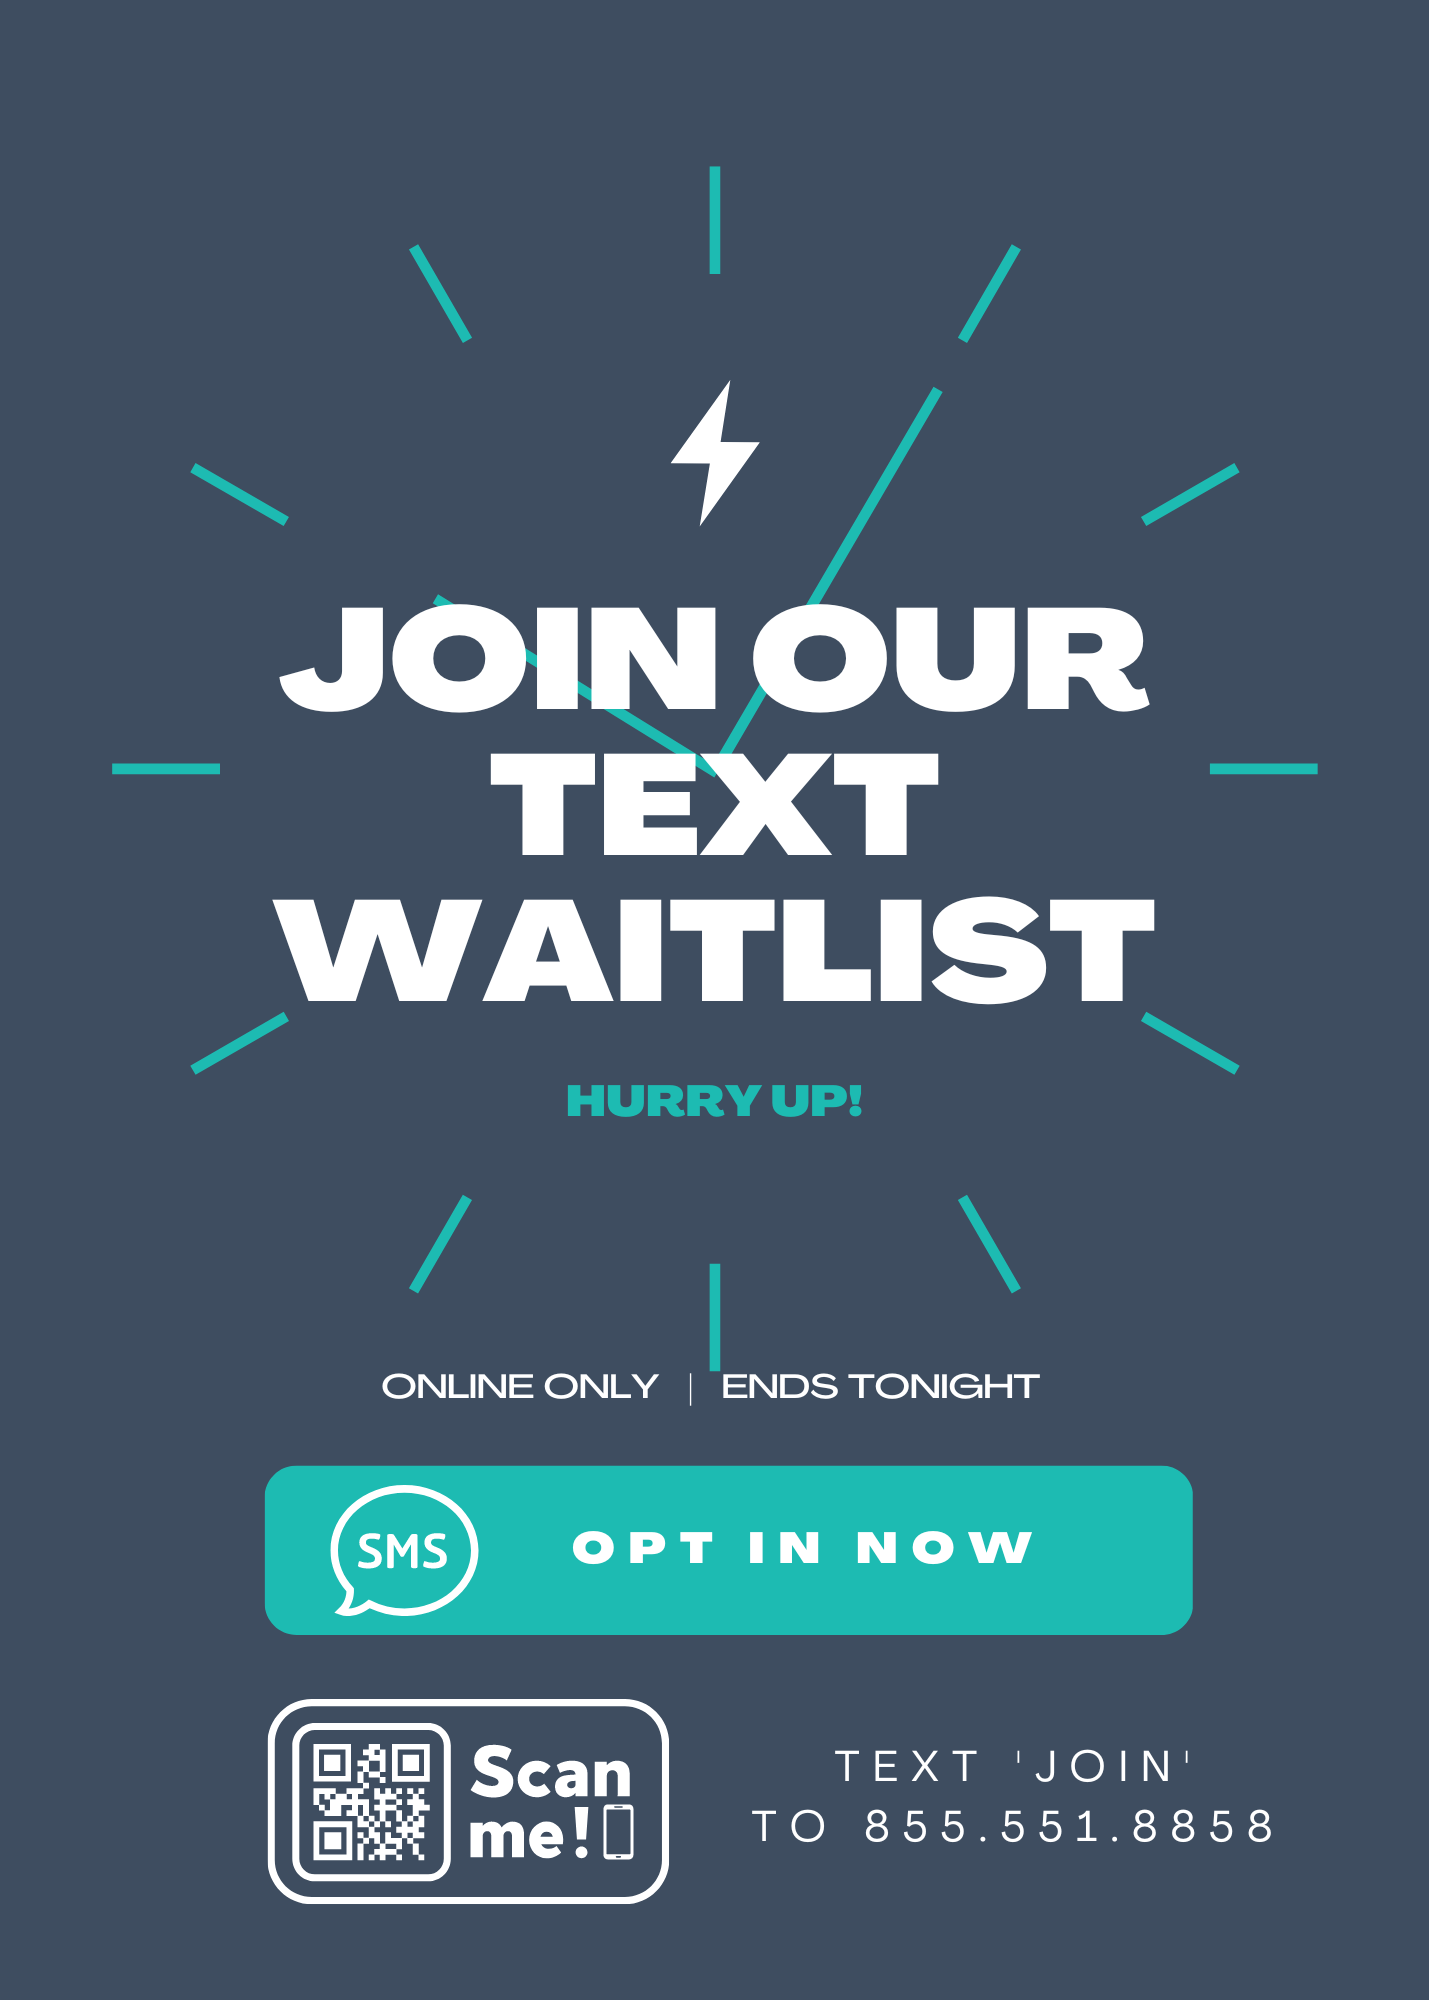 waitlist form with multiple call to actions for opt-in via QR and SMS